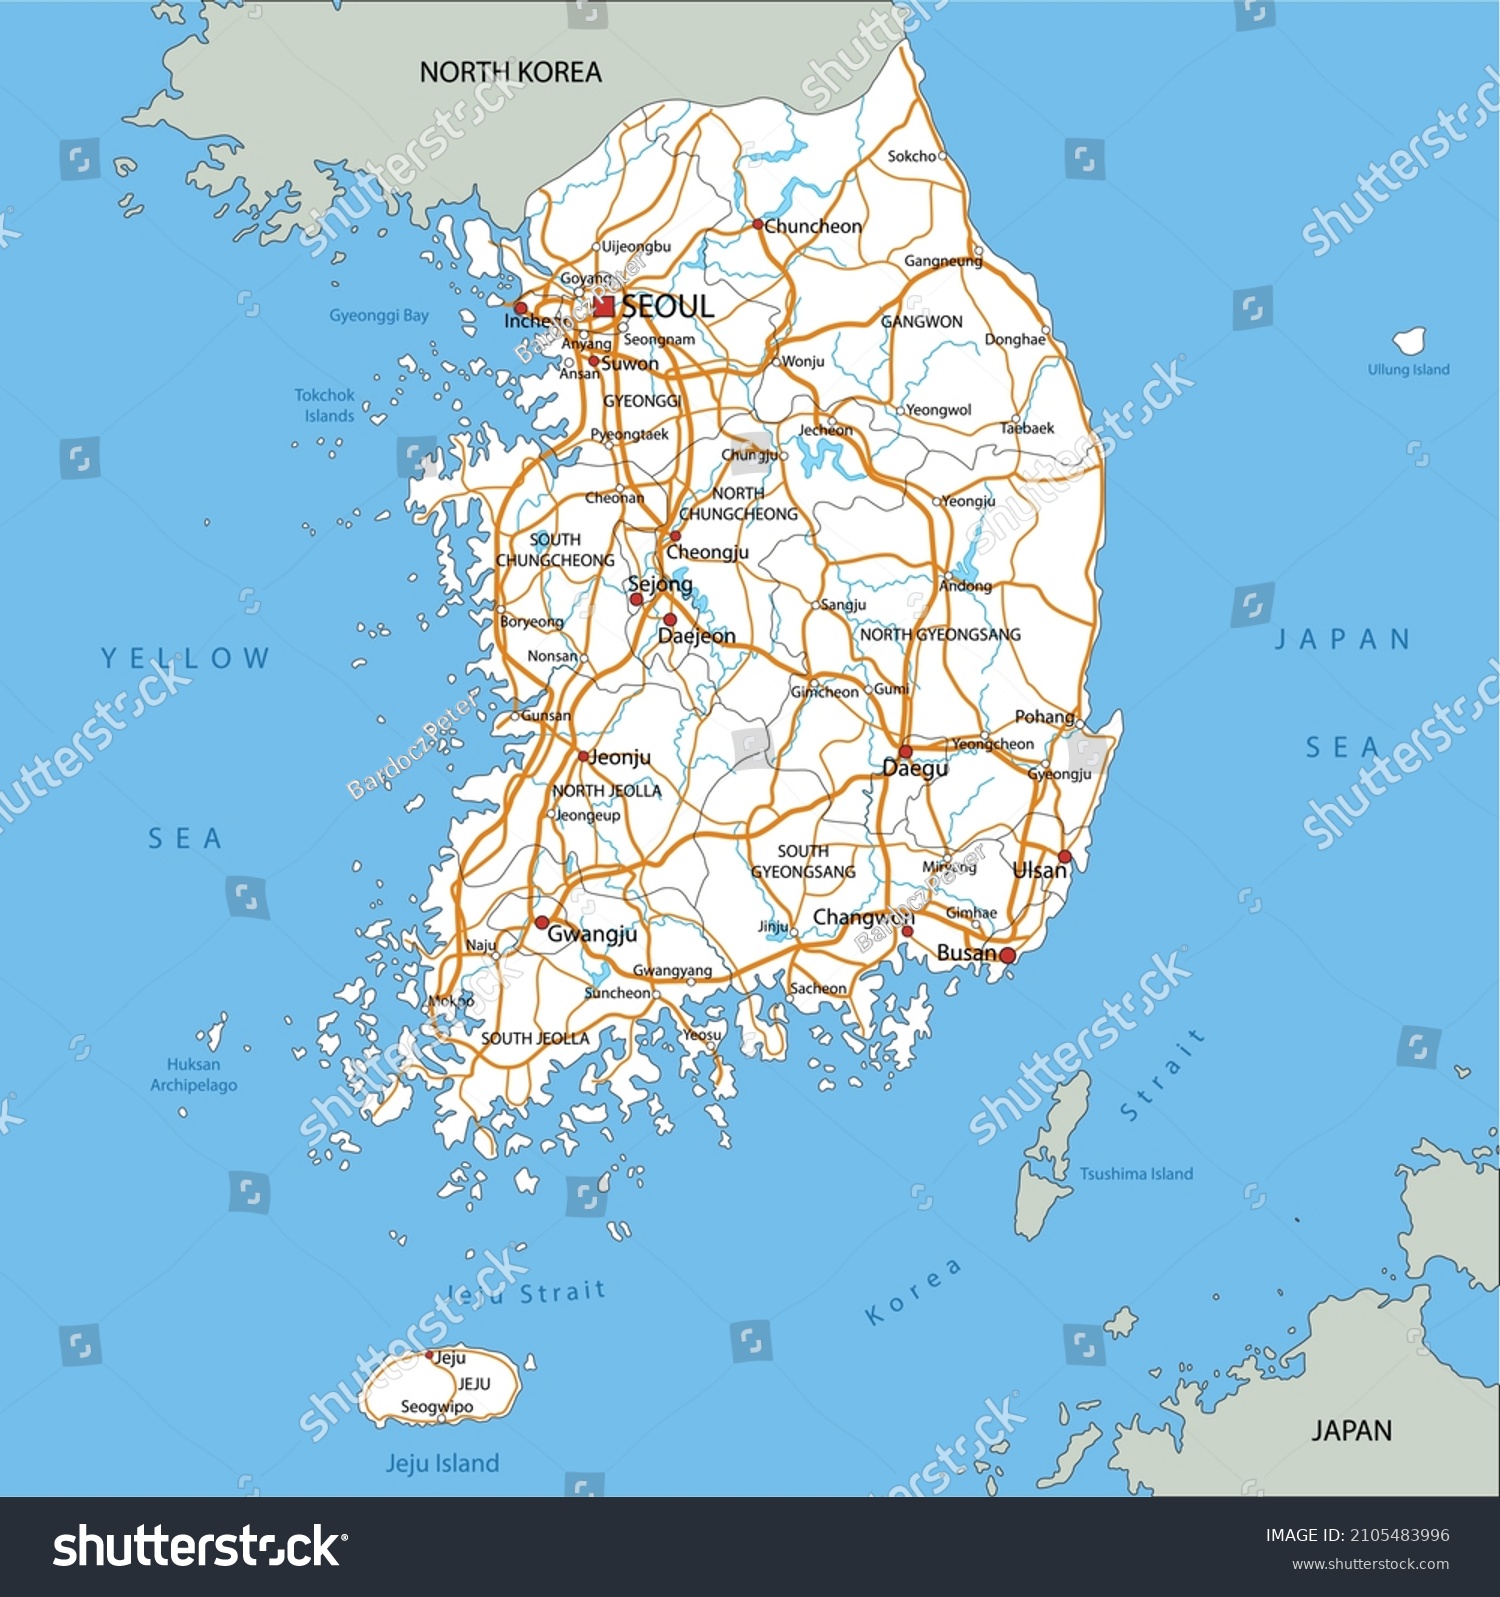 South Korea Road Map High Detailed South Korea Road Map Stock Vector (Royalty Free) 2105483996 |  Shutterstock